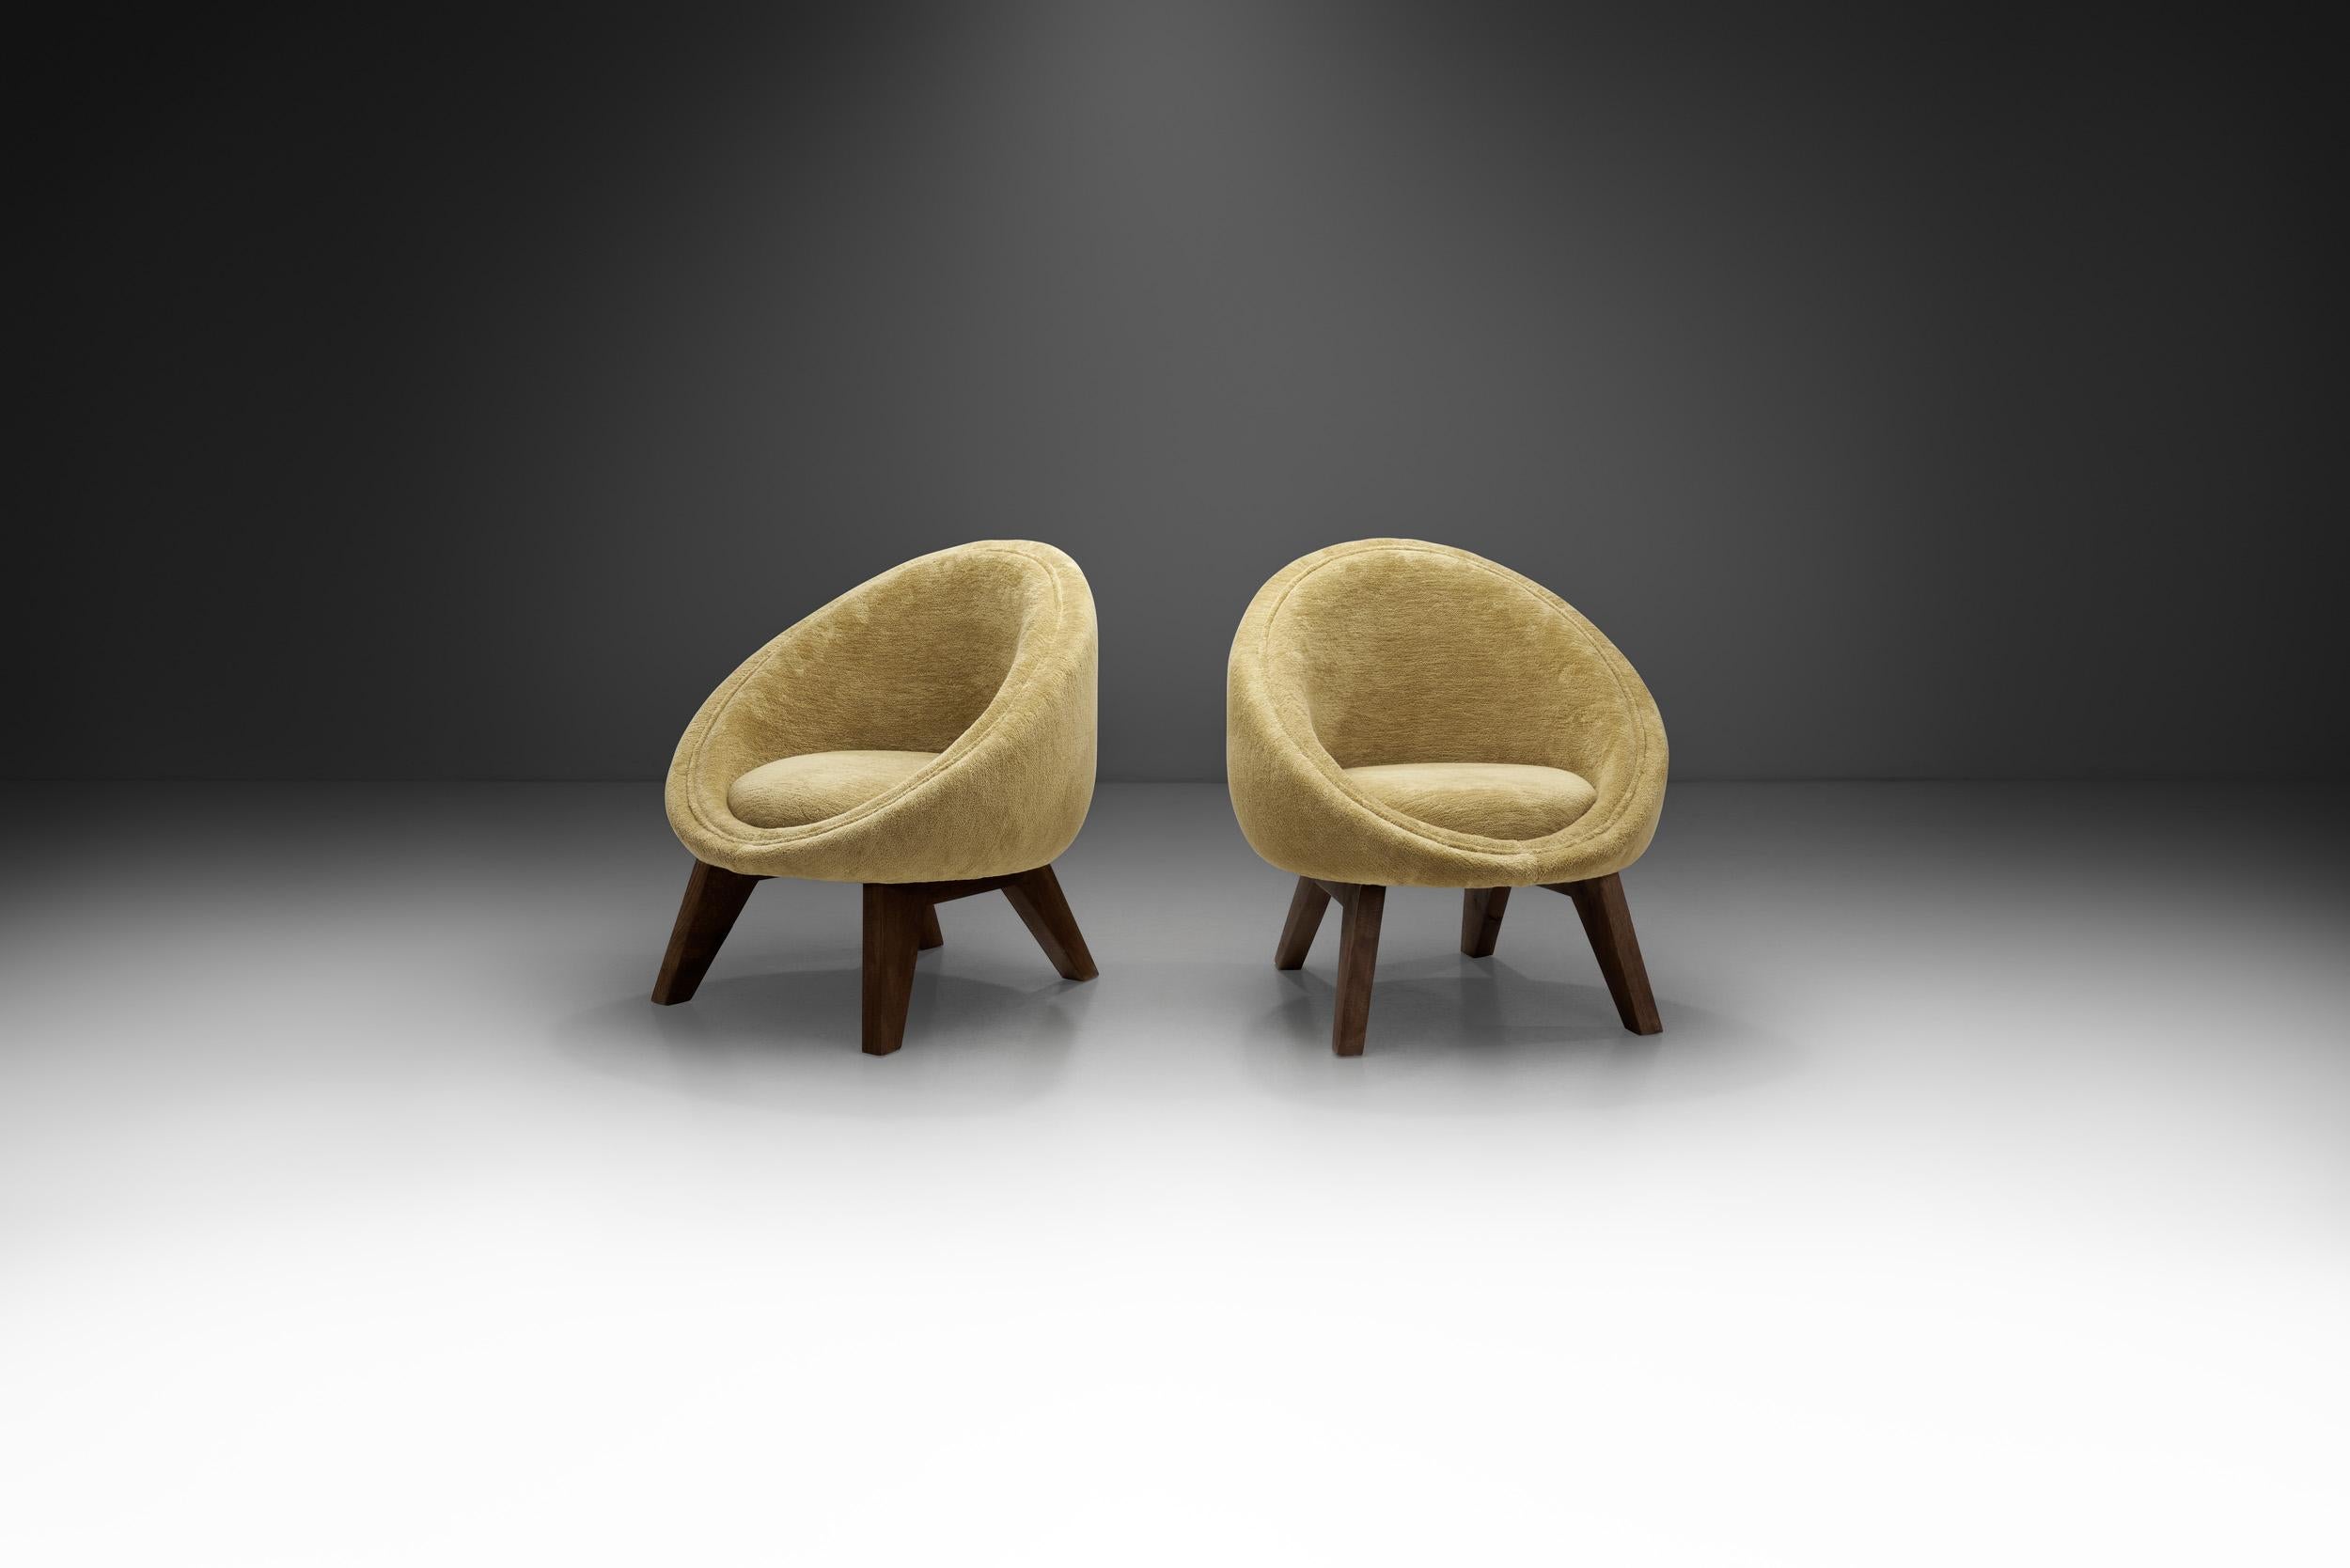 Cosy shapes and elegant hues come together to make this pair of easy chairs a stylish accent pieces that cannot go overlooked. Boasting strong curved lines, custom oak legs, and luxurious upholstery, the chairs’ tactile details add a soft artistic